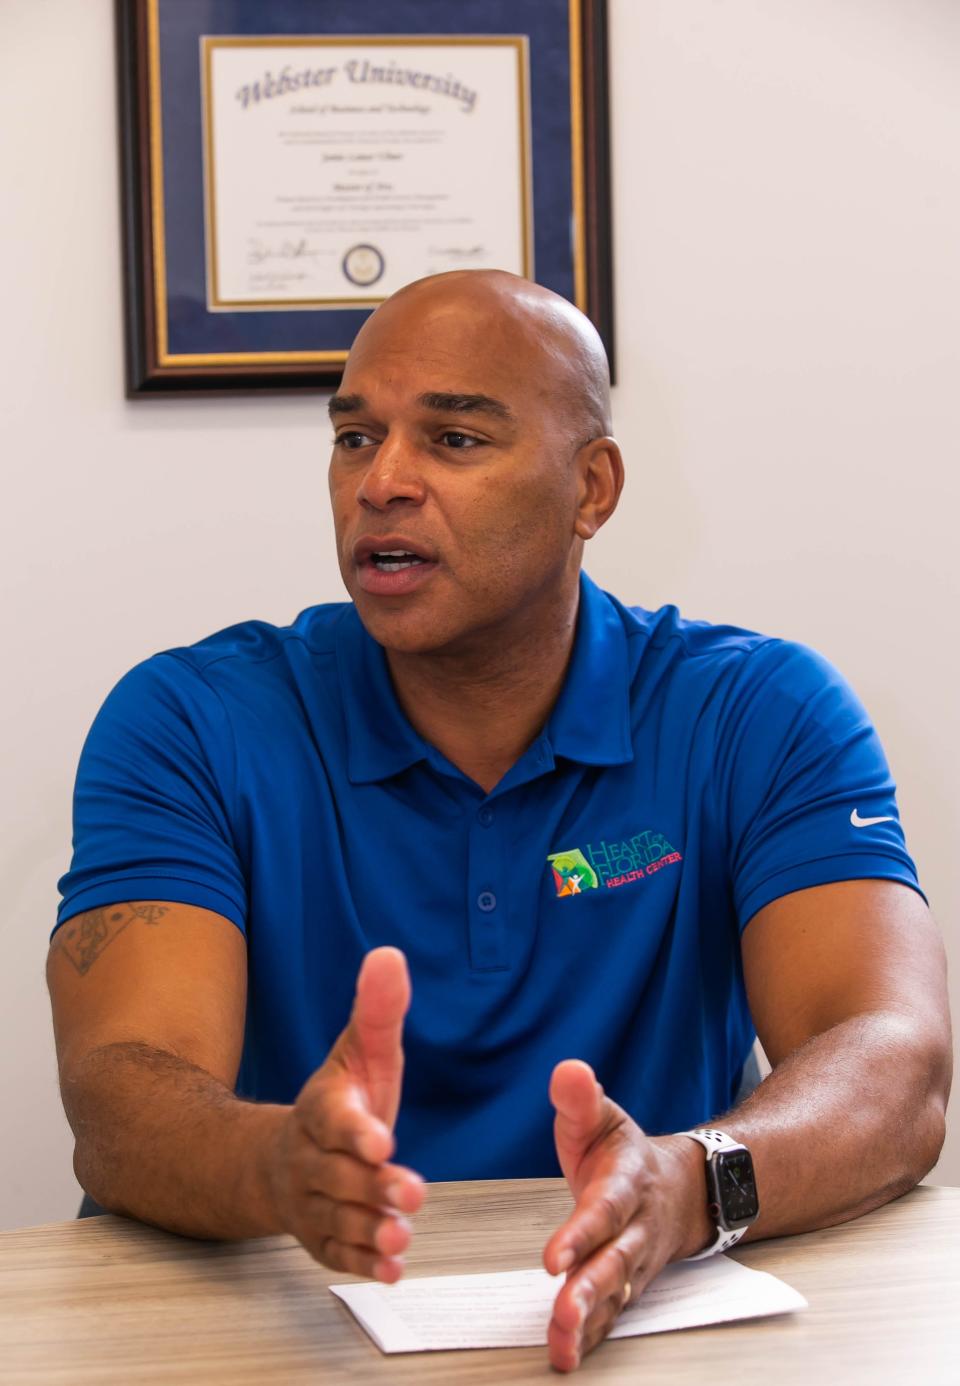 Heart of Florida CEO Jamie Ulmer talks about his accomplishments Friday after announcing he would be leaving on June 24 to take on a new role at the Healthcare Network of Southwest Florida in Naples.